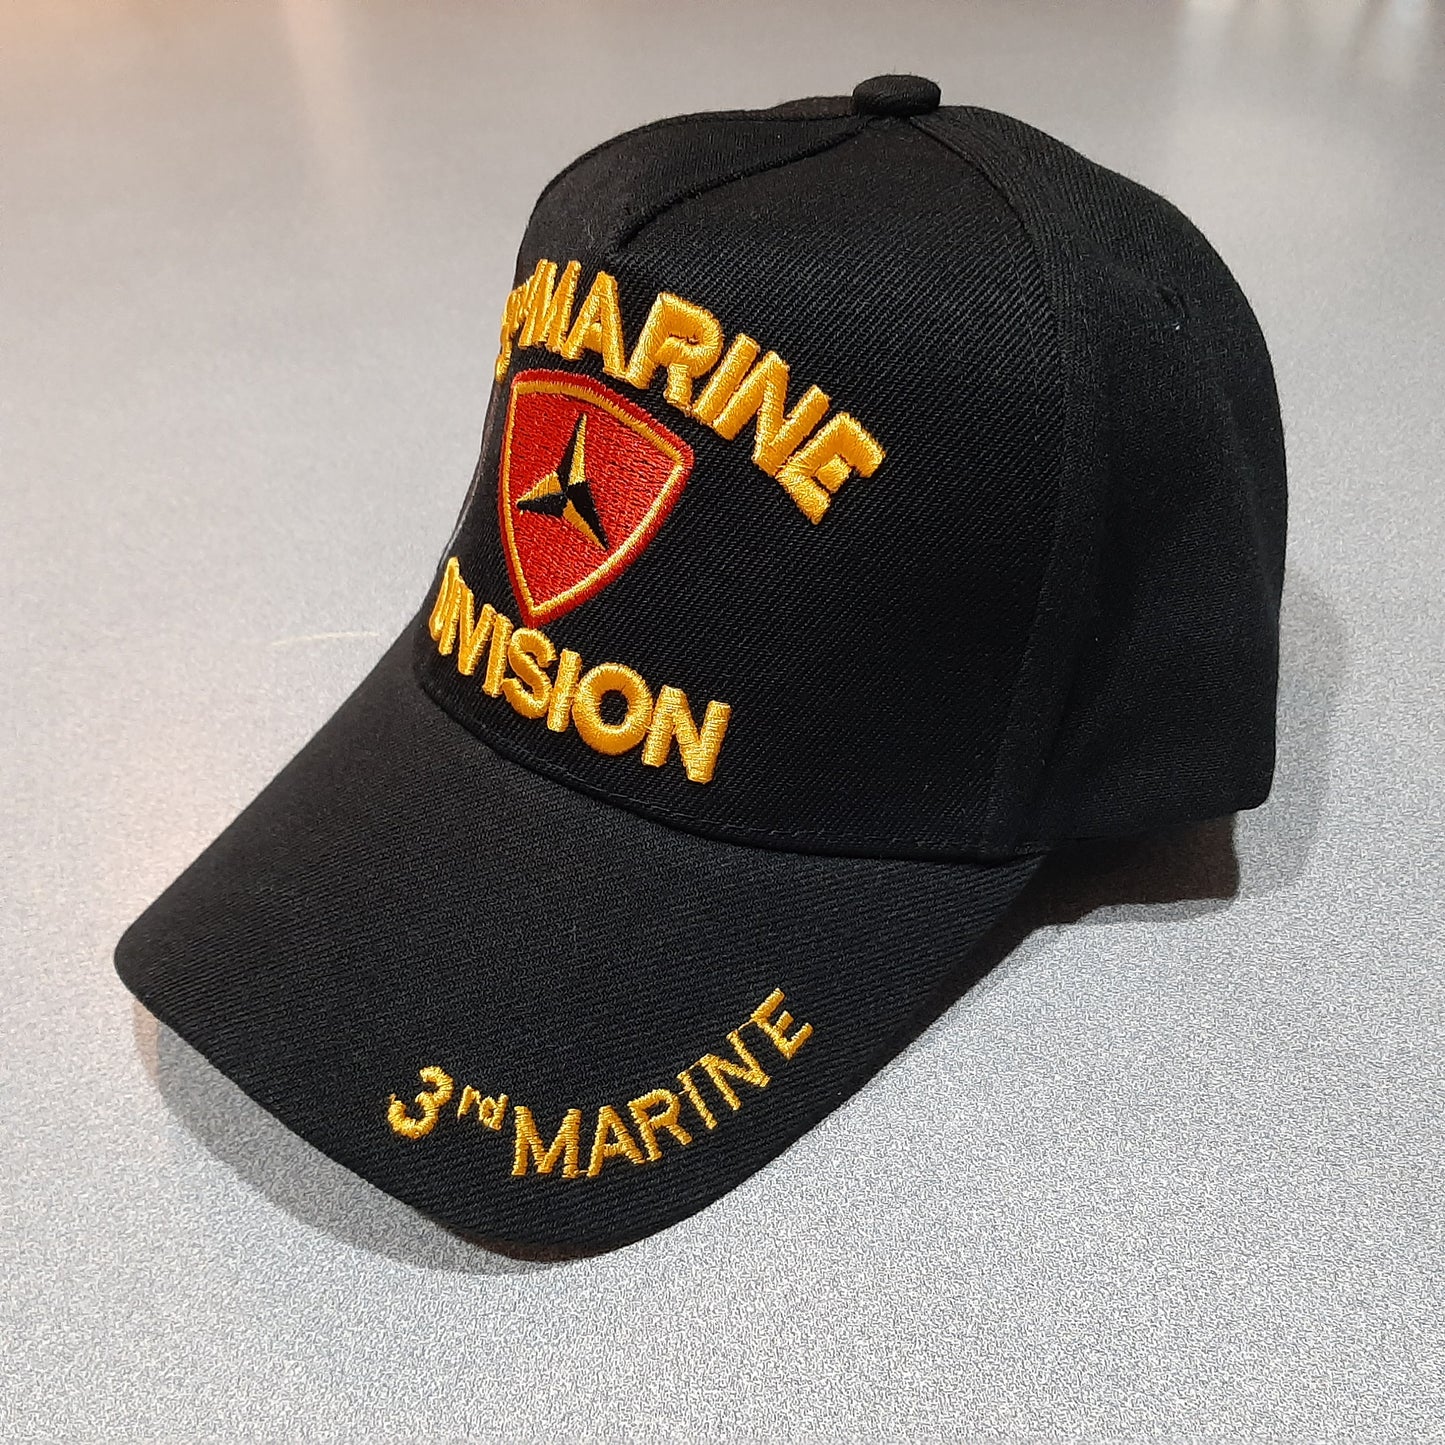 3rd Marine Division Men's Ball Cap Hat Black Embroidered Acrylic Strapback Curve